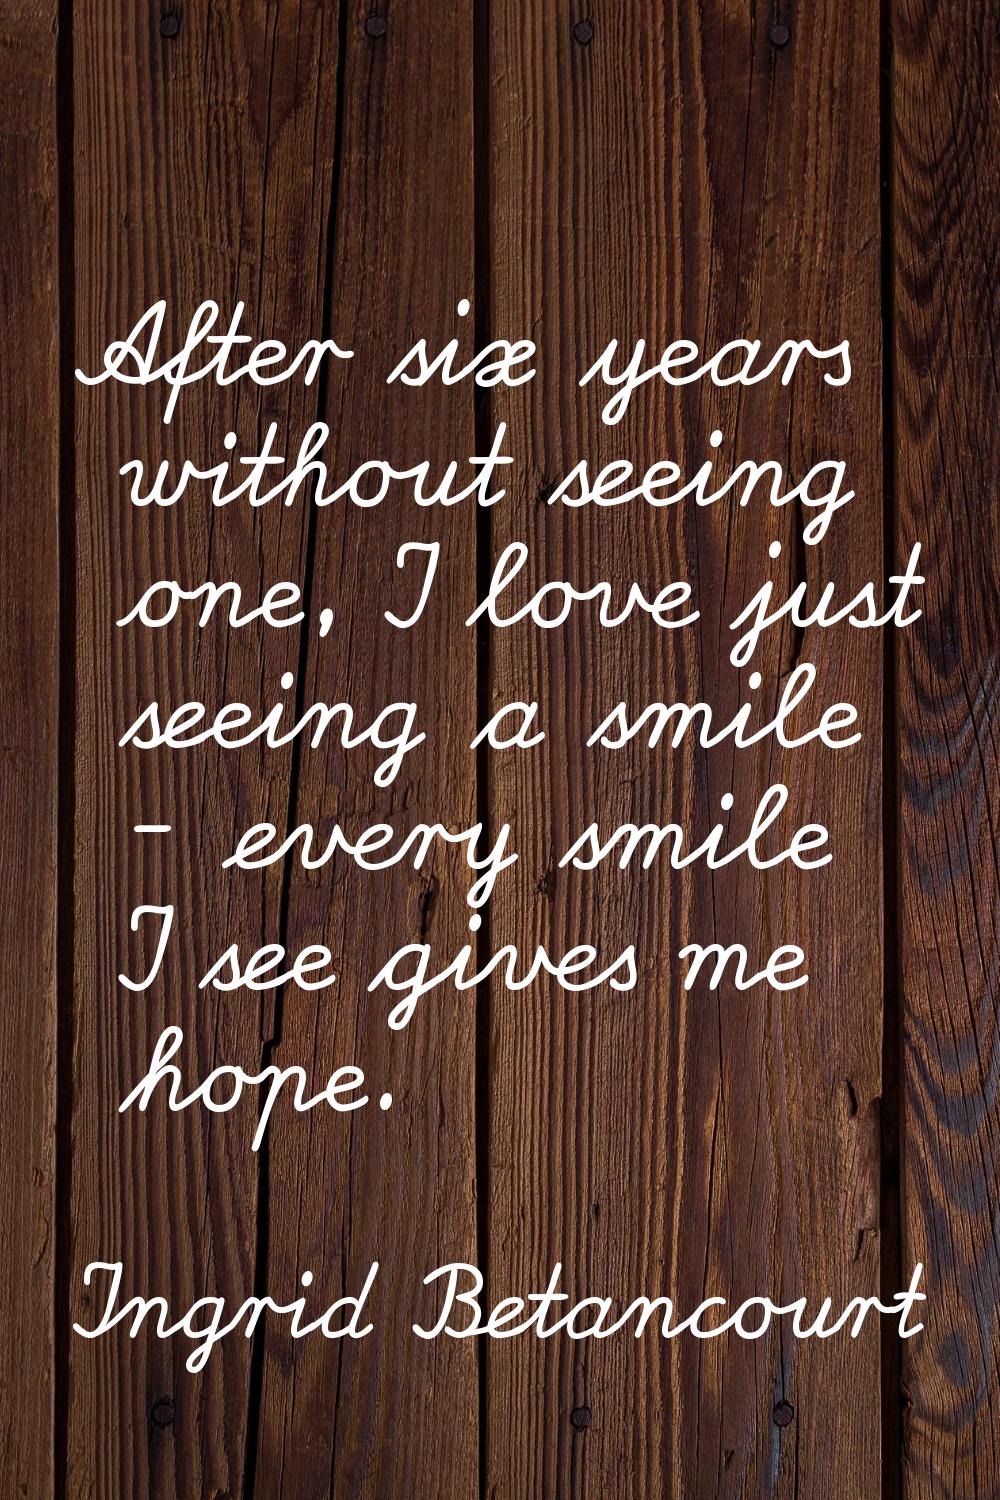 After six years without seeing one, I love just seeing a smile - every smile I see gives me hope.